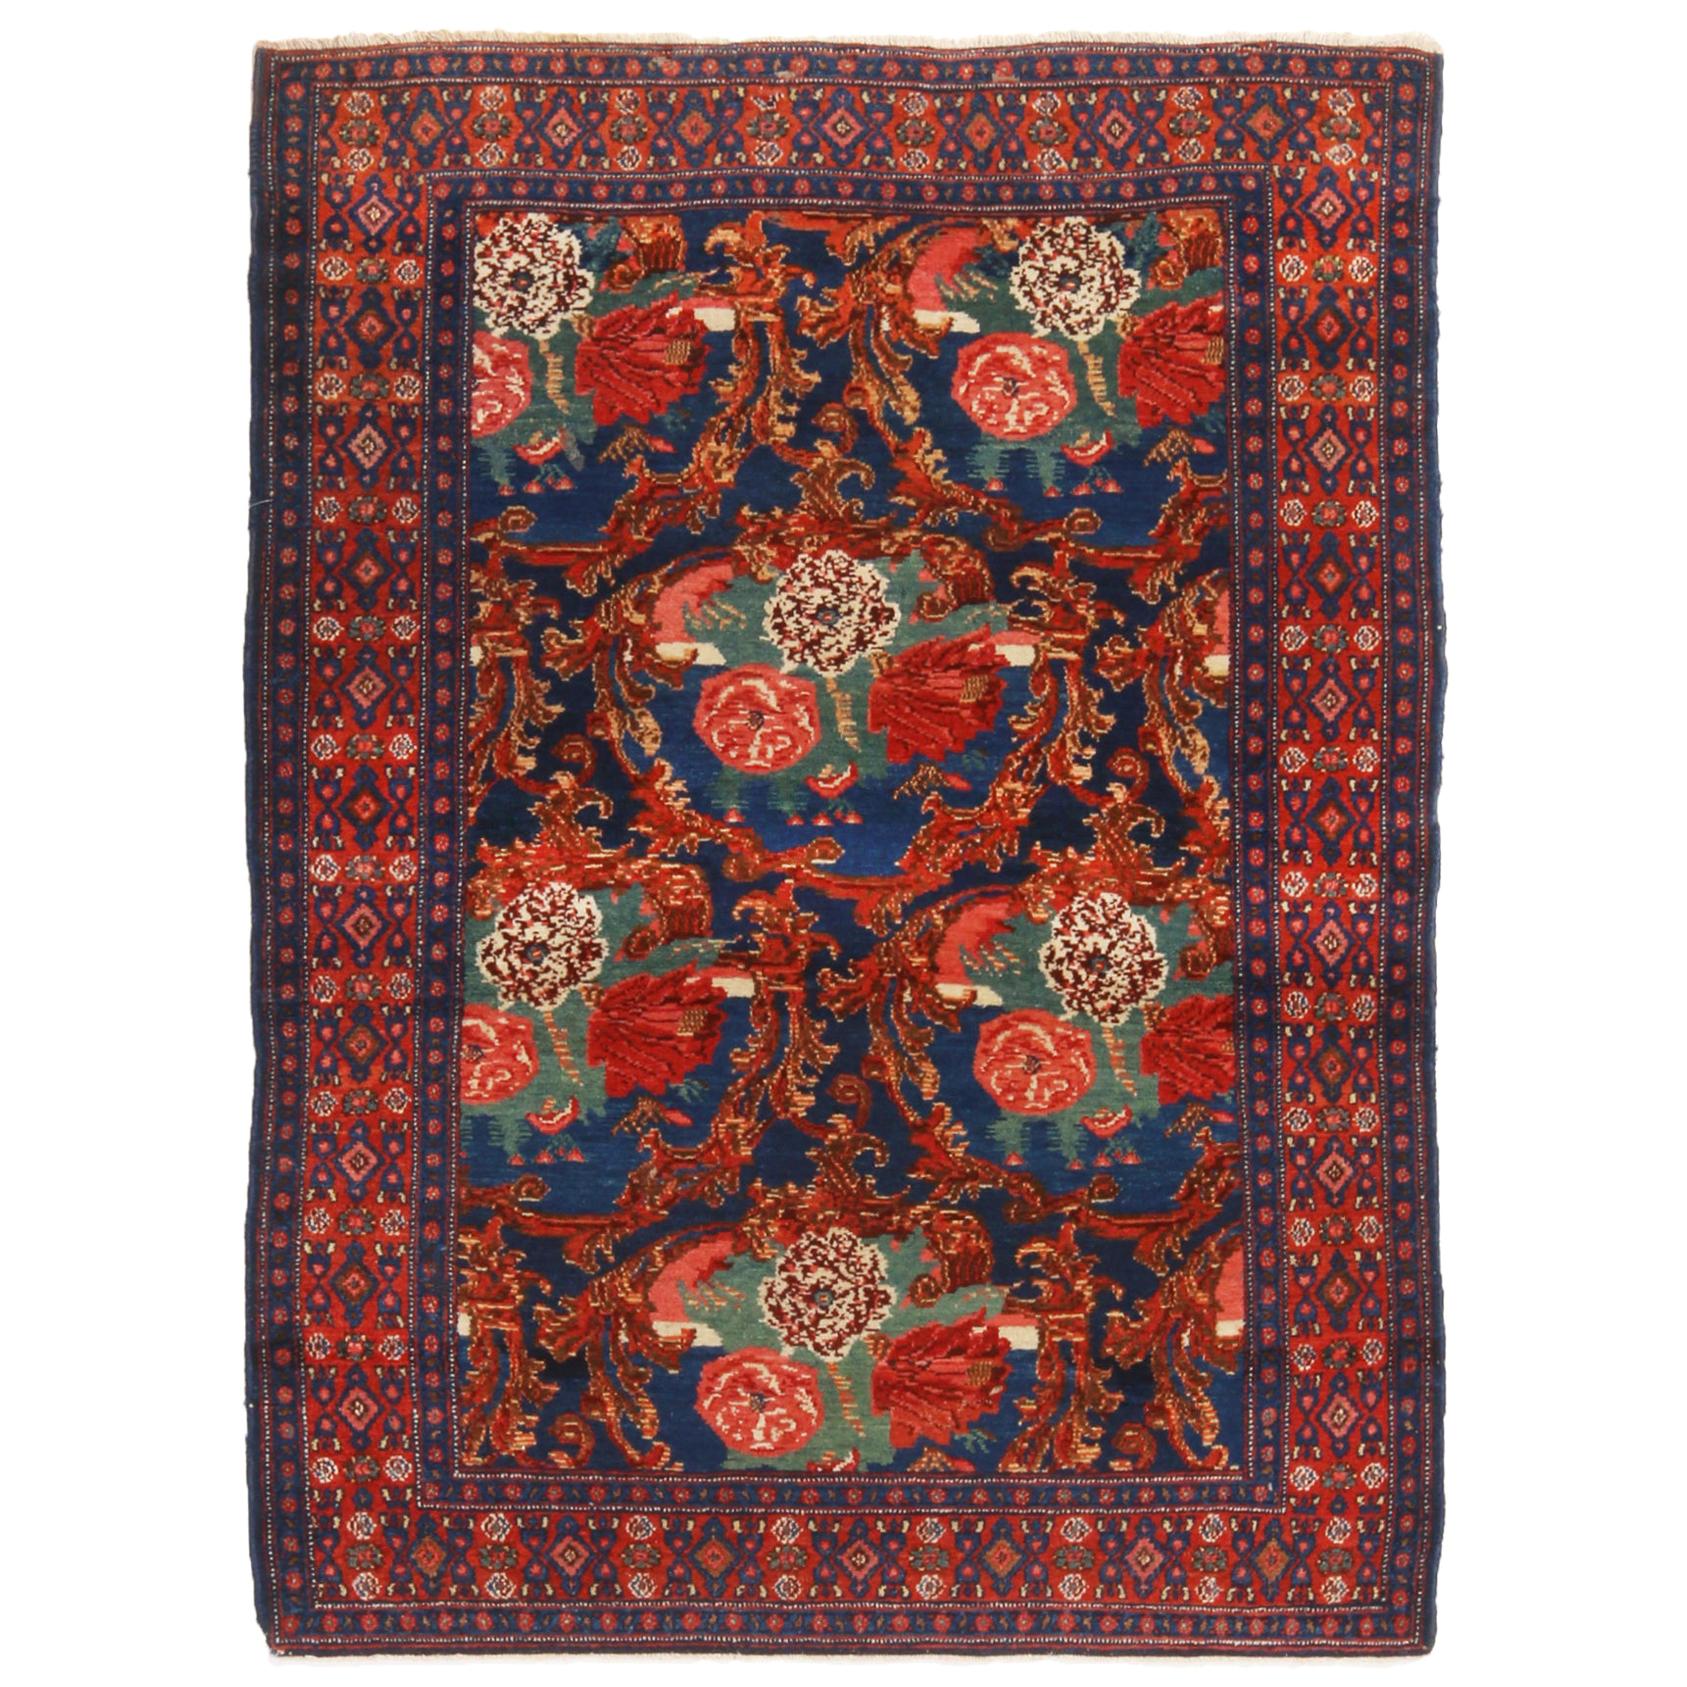 Antique Senneh Traditional Crimson Red and Blue Wool Persian Rug